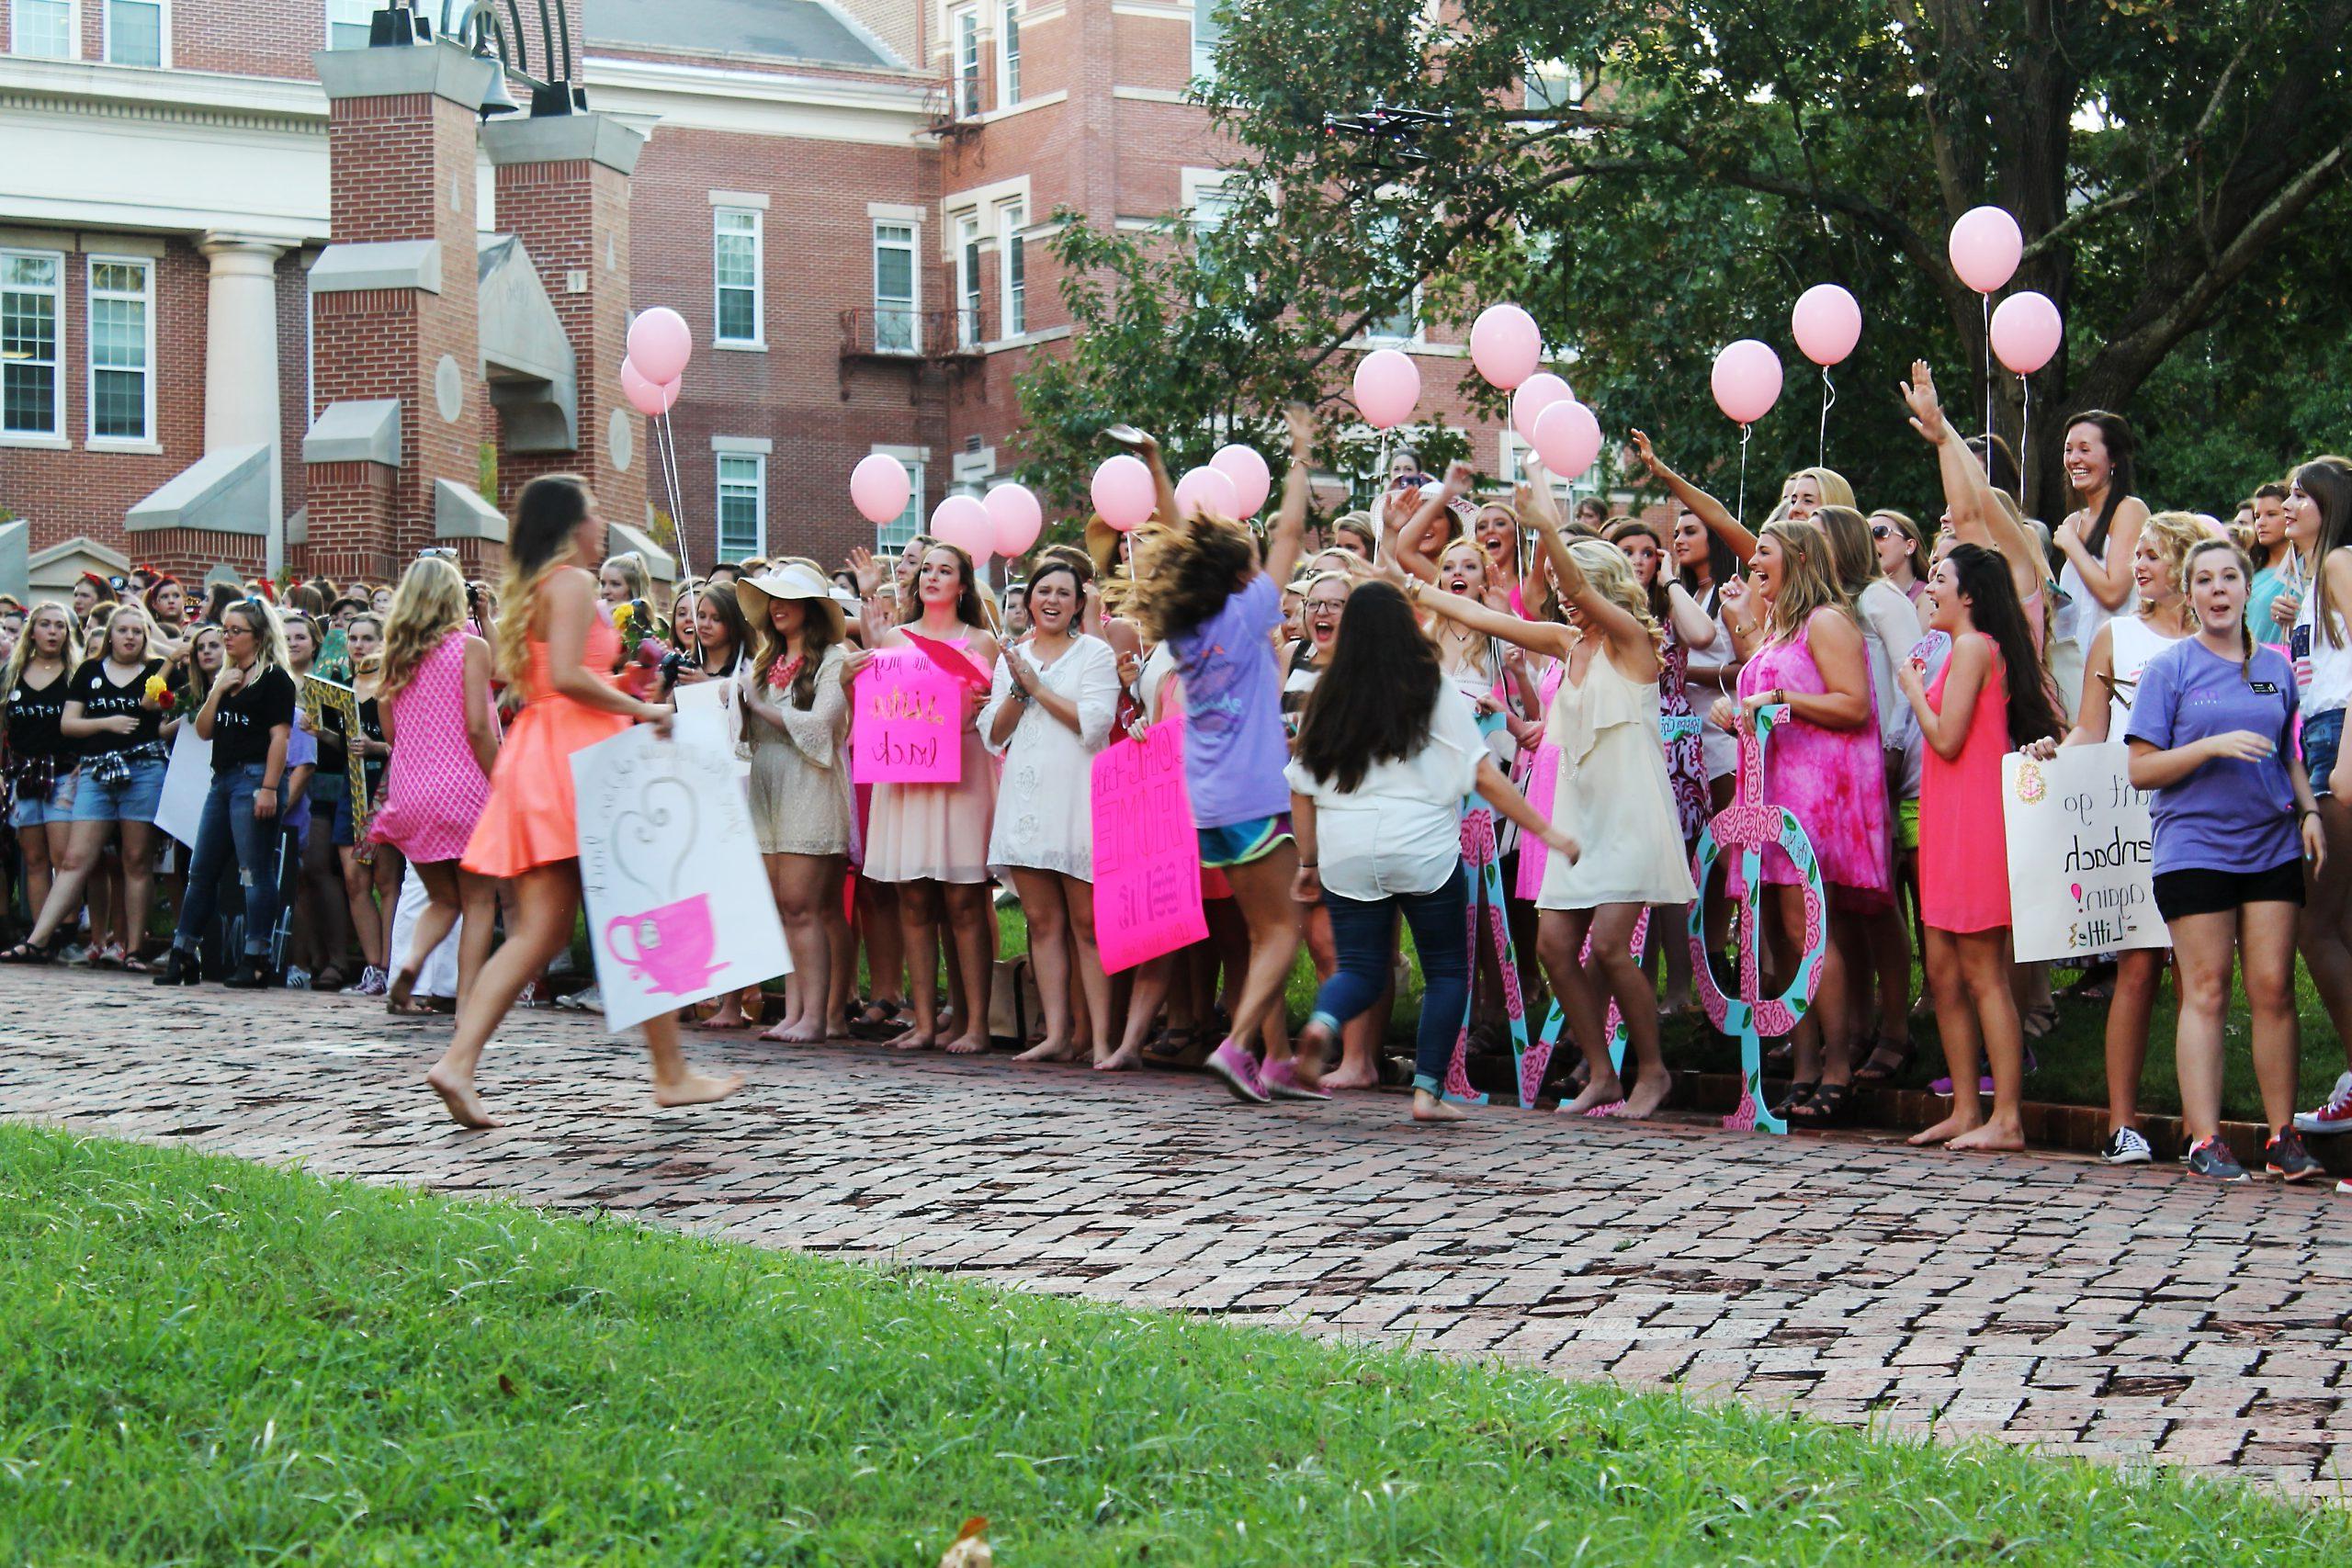 Students celebrate during Bid Day at the University of Montevallo.